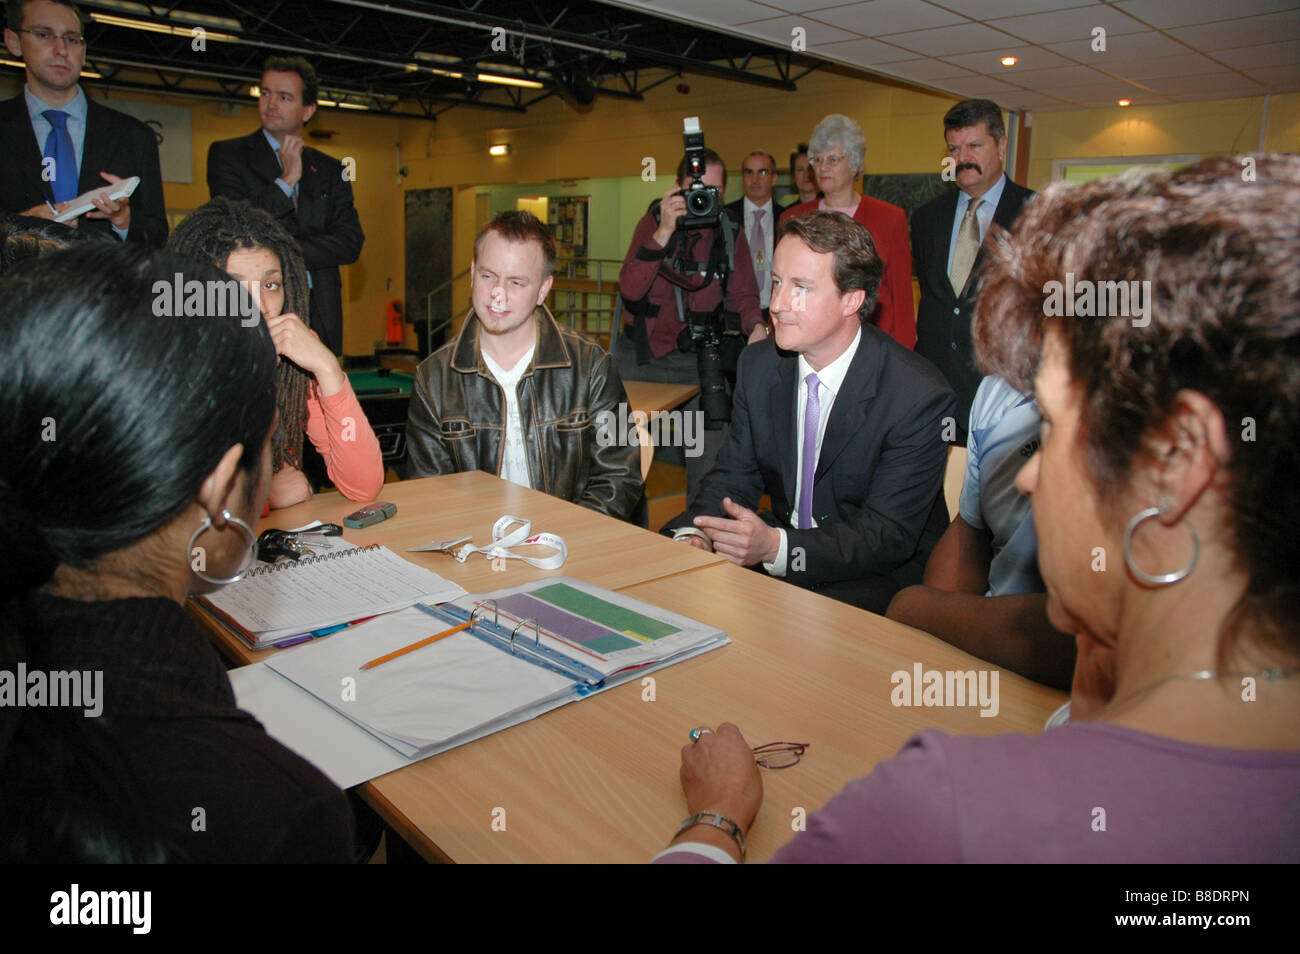 David Cameron MP visits a west London Youth Centre during his campaign for leadership of the Conservative Party Stock Photo